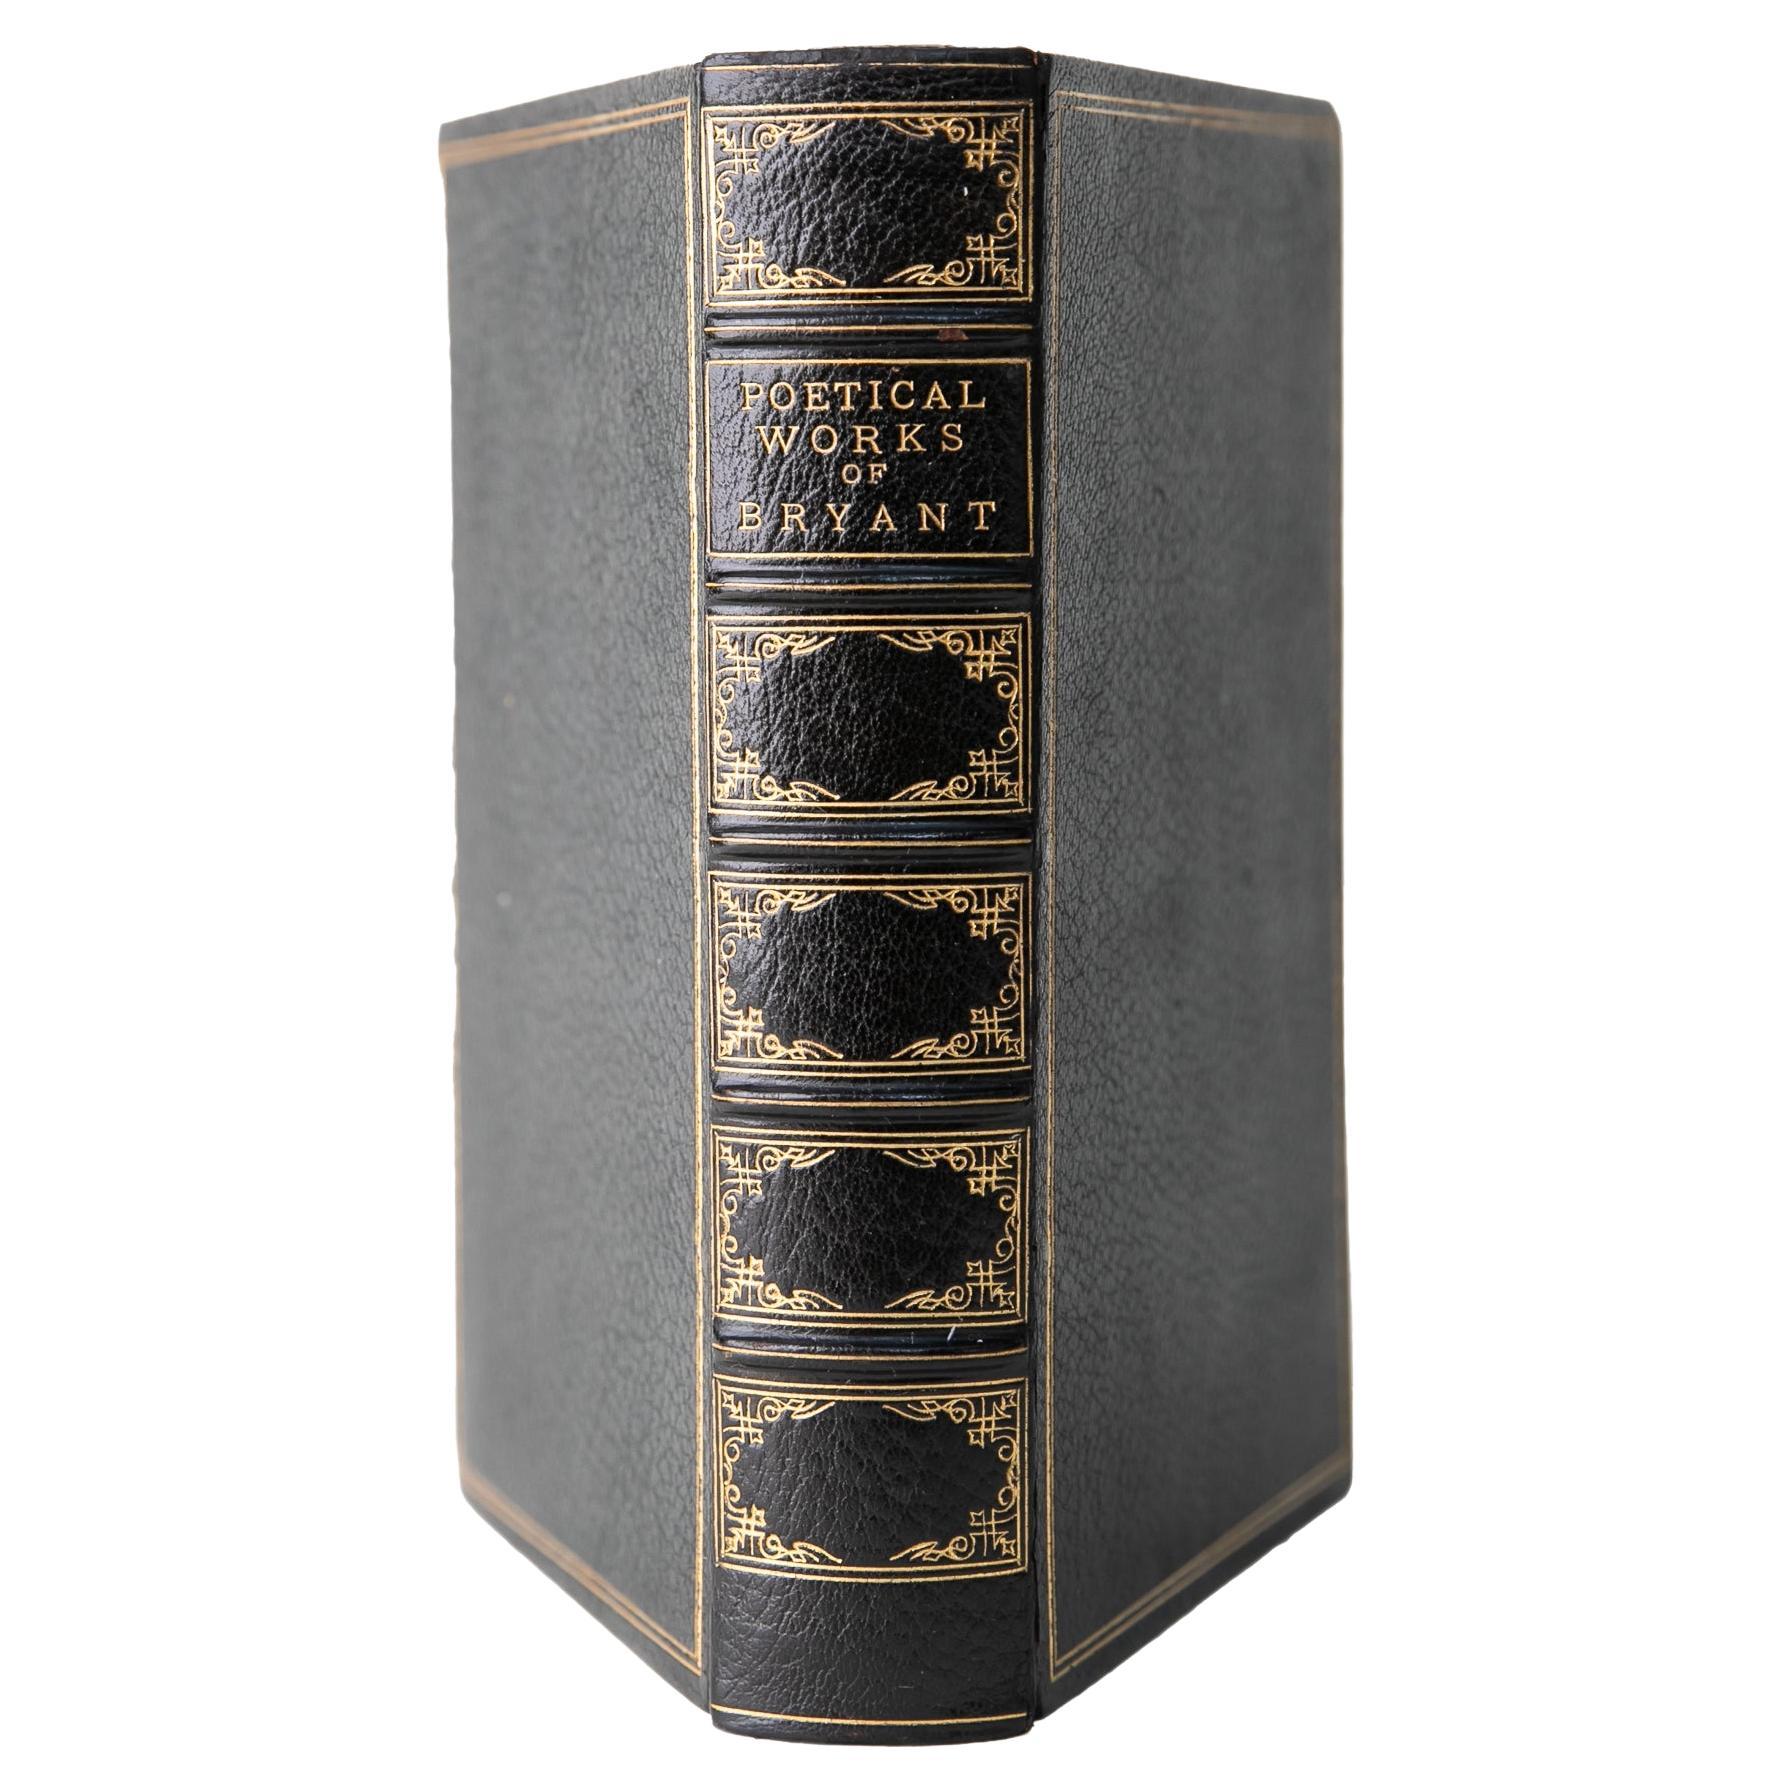 1 Volume. William Cullen Bryant, The Poetical Works. For Sale